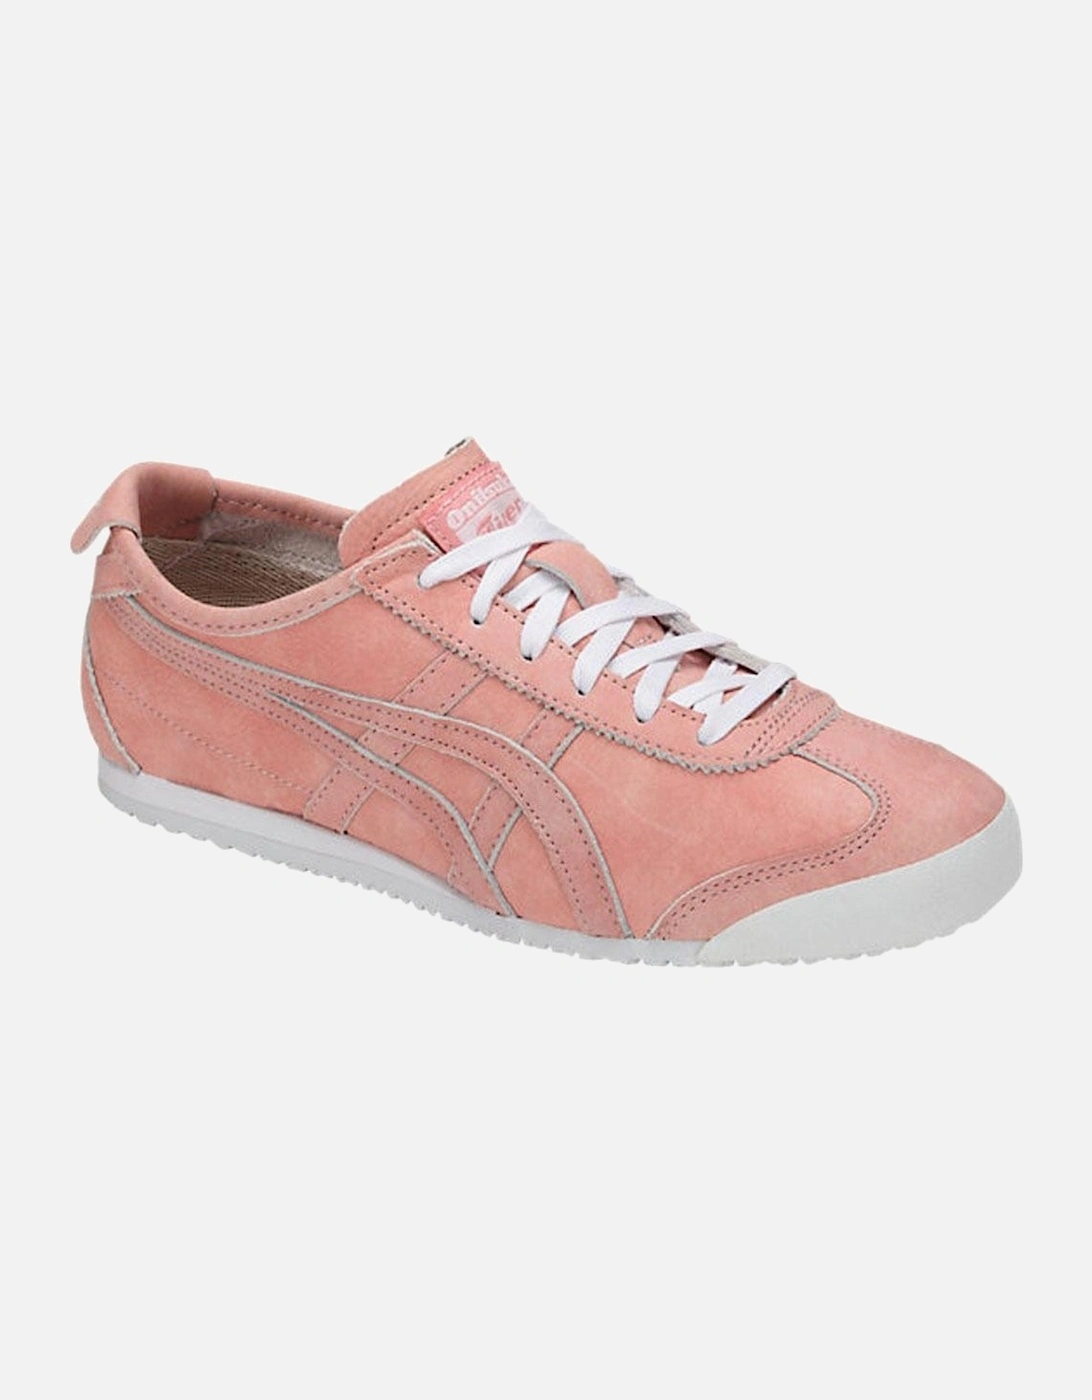 Mexico 66 Trainers - Coral Cloud Pink